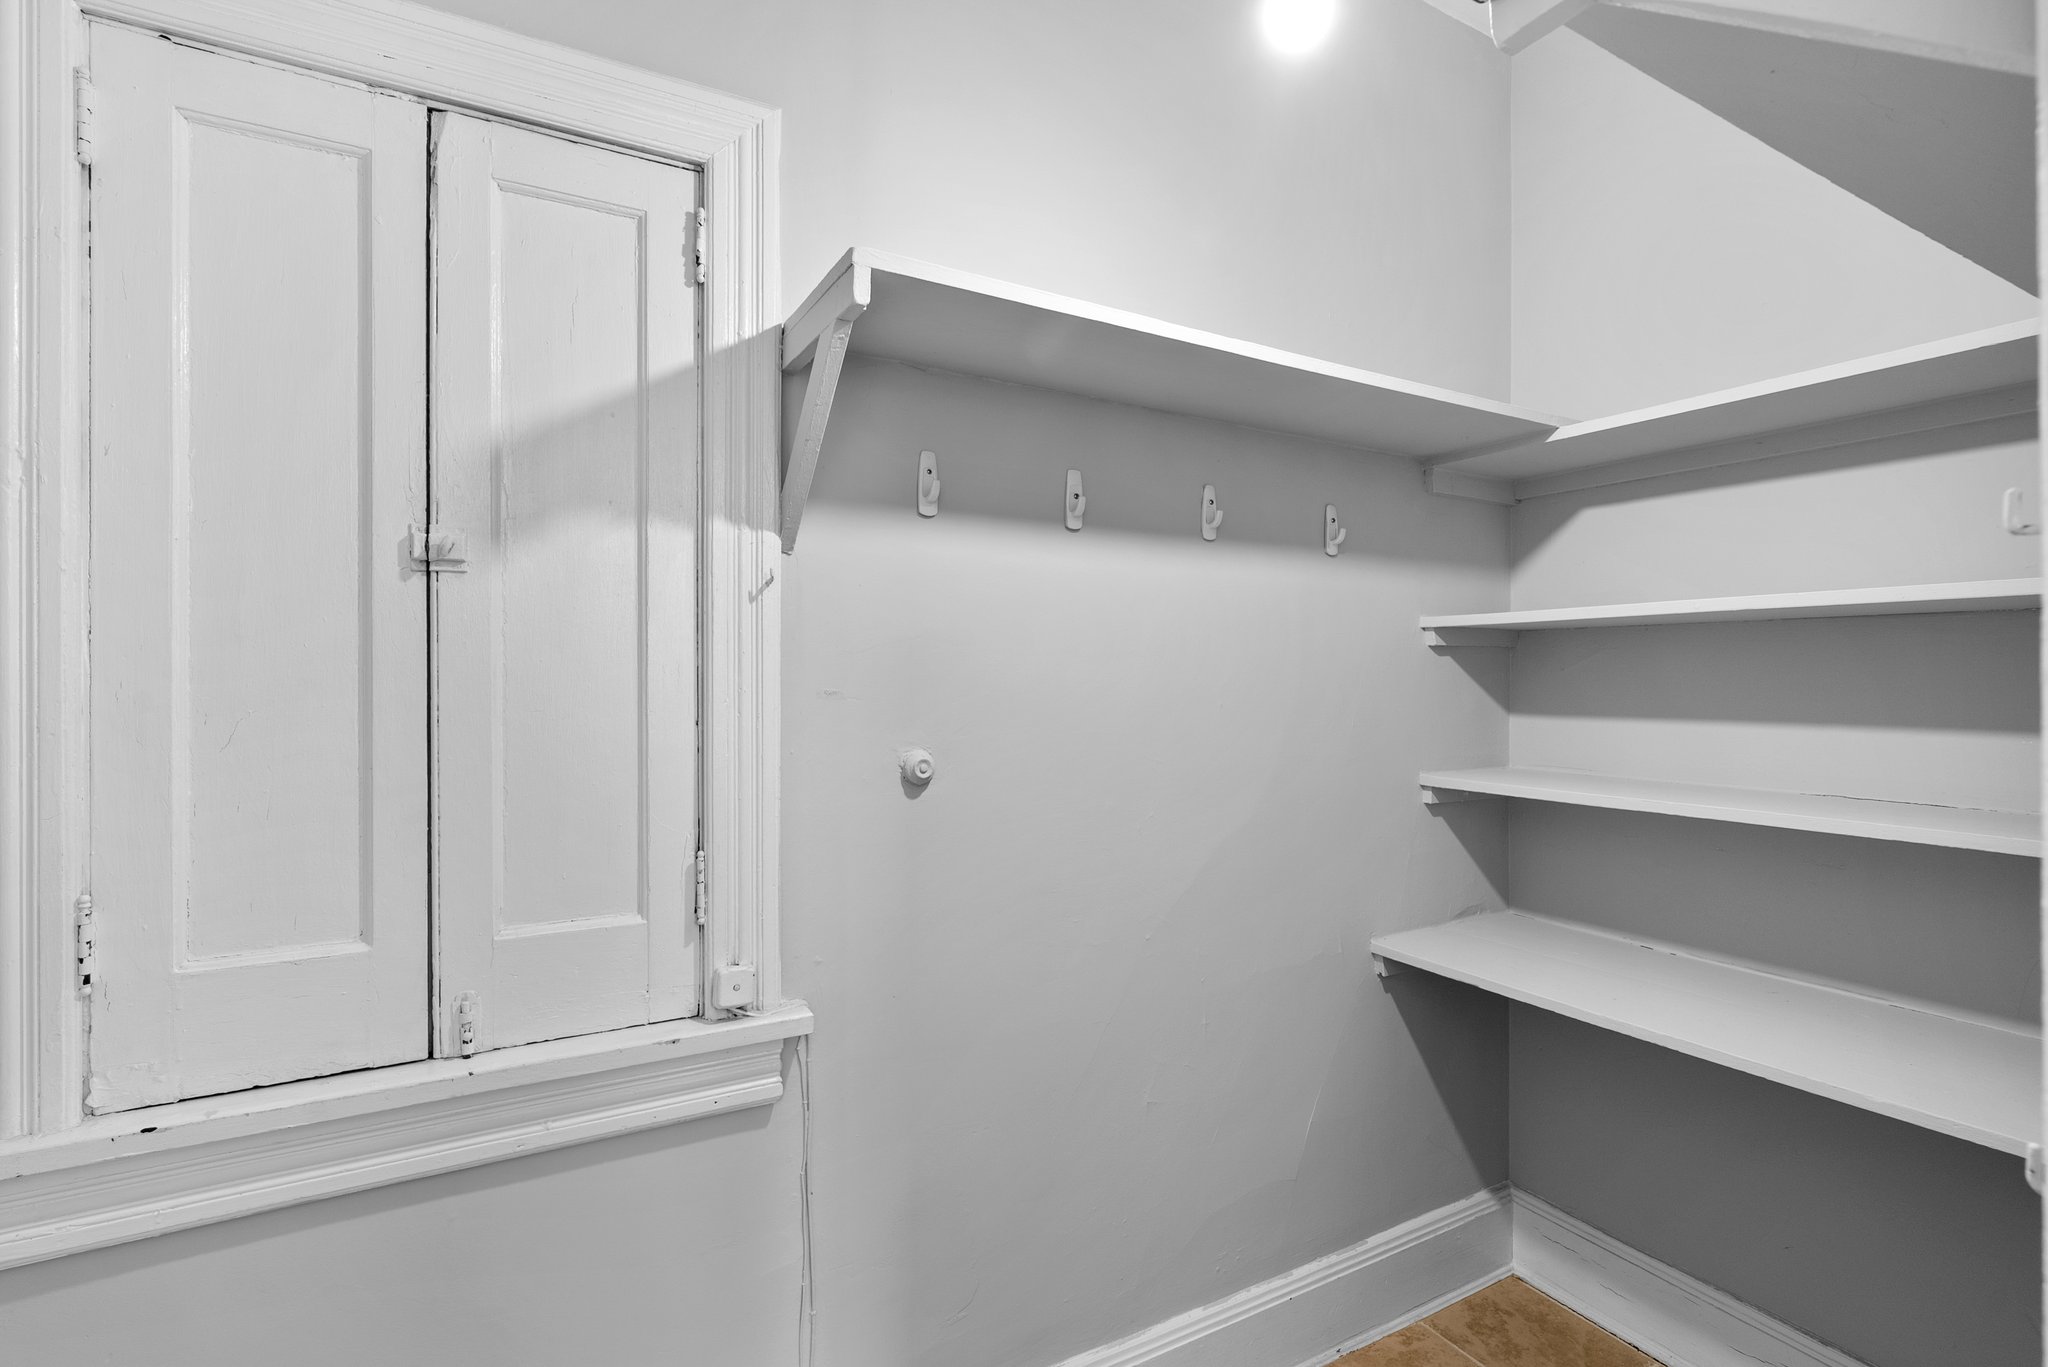 Walk-in pantry for tons of storage